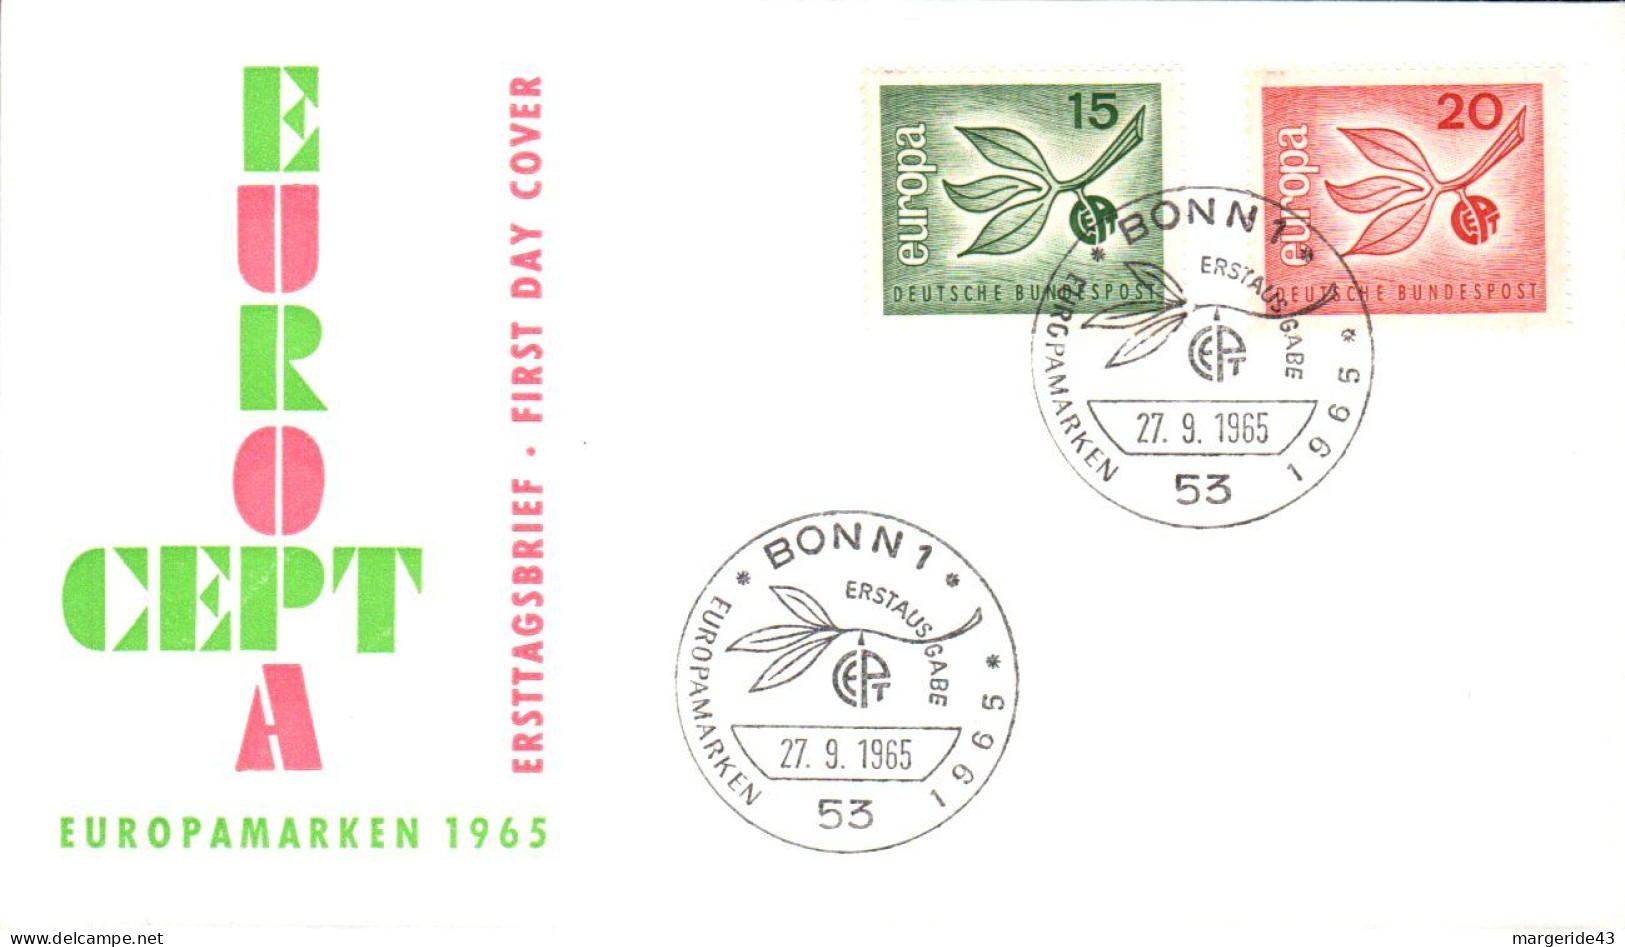 EUROPA 1965 ALLEMAGNE FDC - 1965